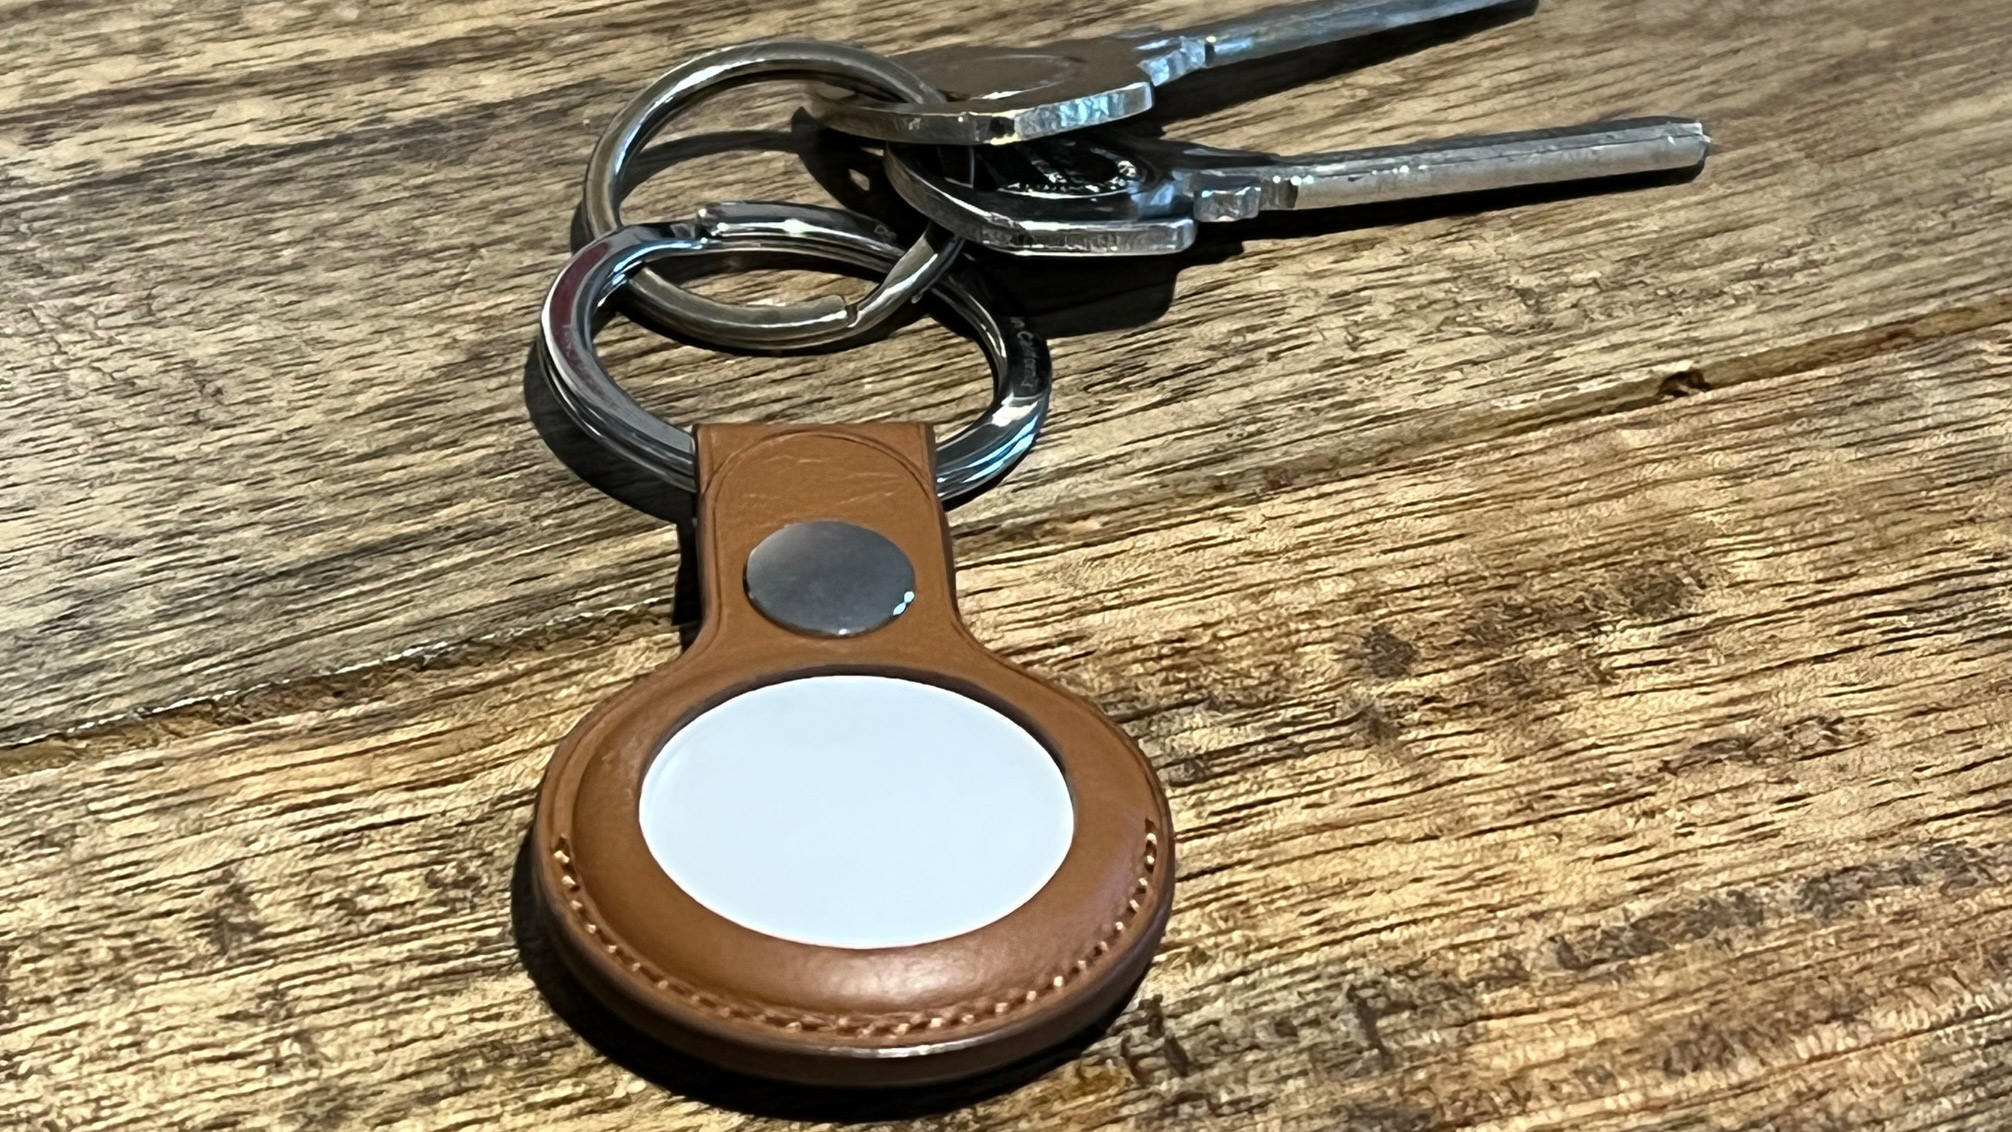 an Apple AirTag on a brown leather keyring, attached to some keys on a wooden surface